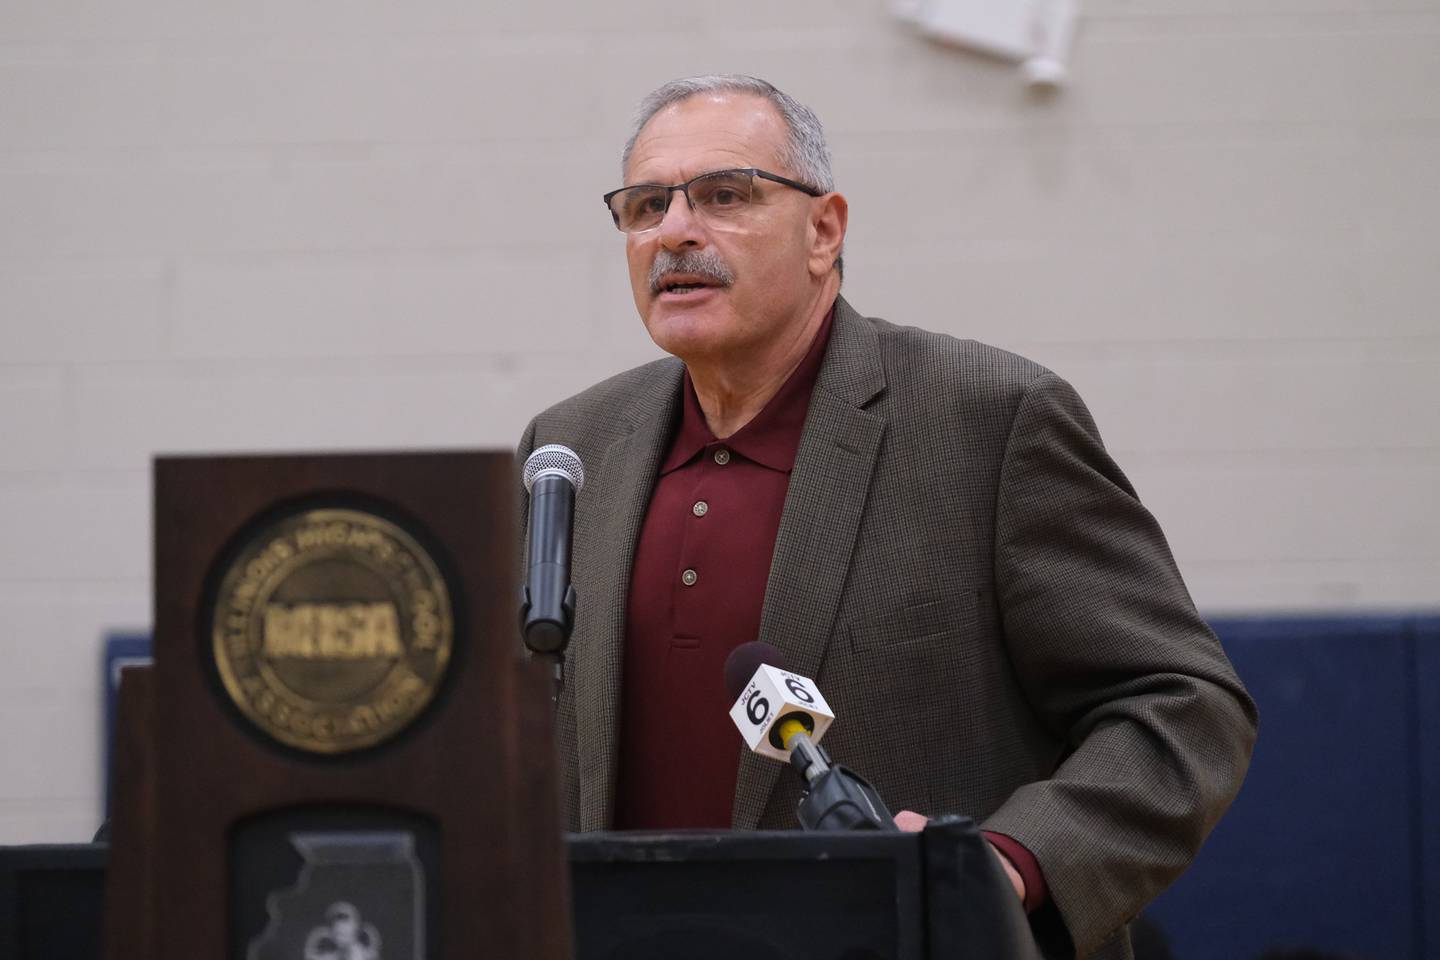 Crest Hill Mayor Ray Soliman speaks during an assembly honoring the Joliet Catholic Class 4A football state champions. Monday, Nov. 29, 2021 in Joliet.